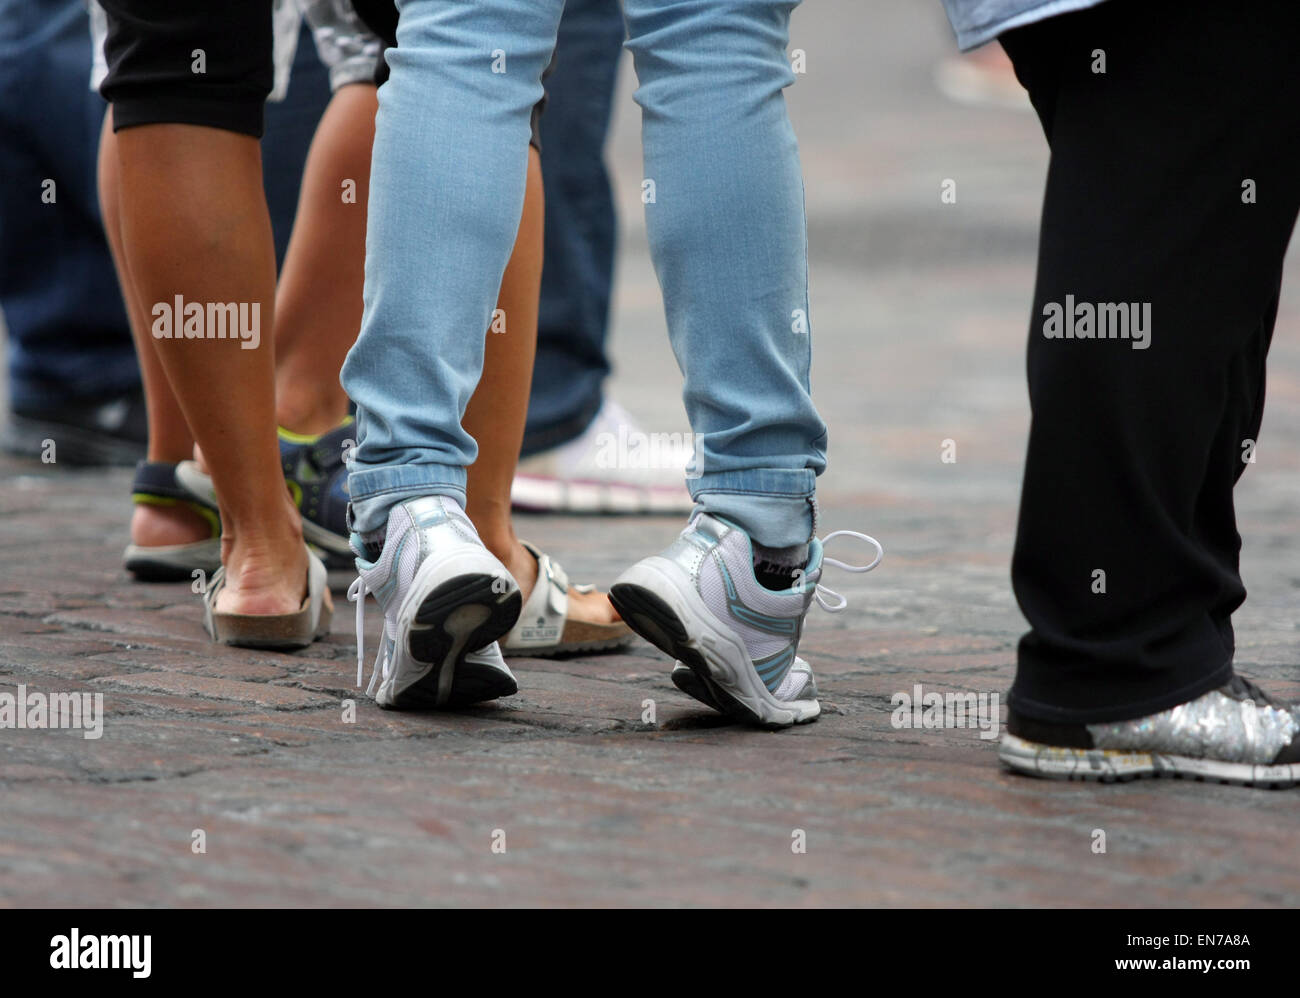 A view of pairs of legs - one person standing with their heels raised off the ground Stock Photo